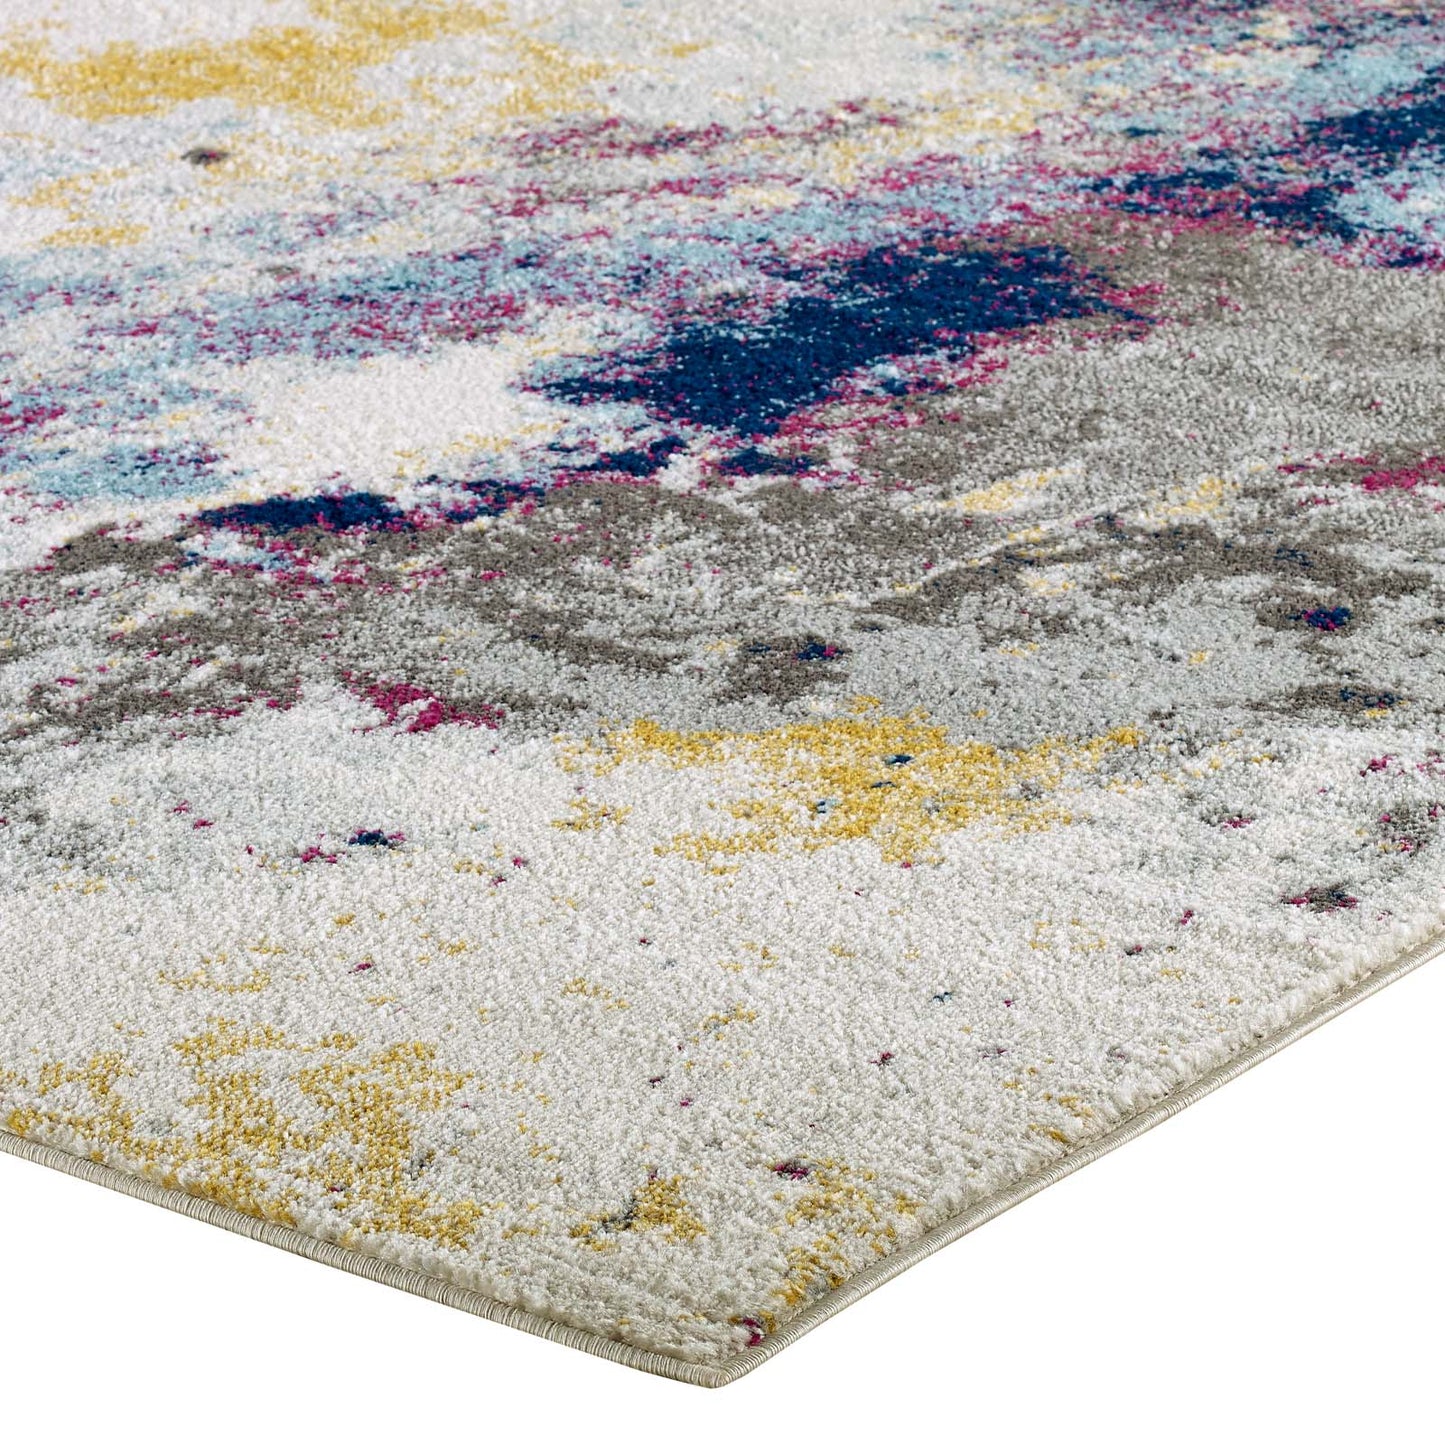 Entourage Adeline Contemporary Modern Abstract 8x10 Area Rug Blue, Gray, Yellow, Ivory, Pink R-1167B-810